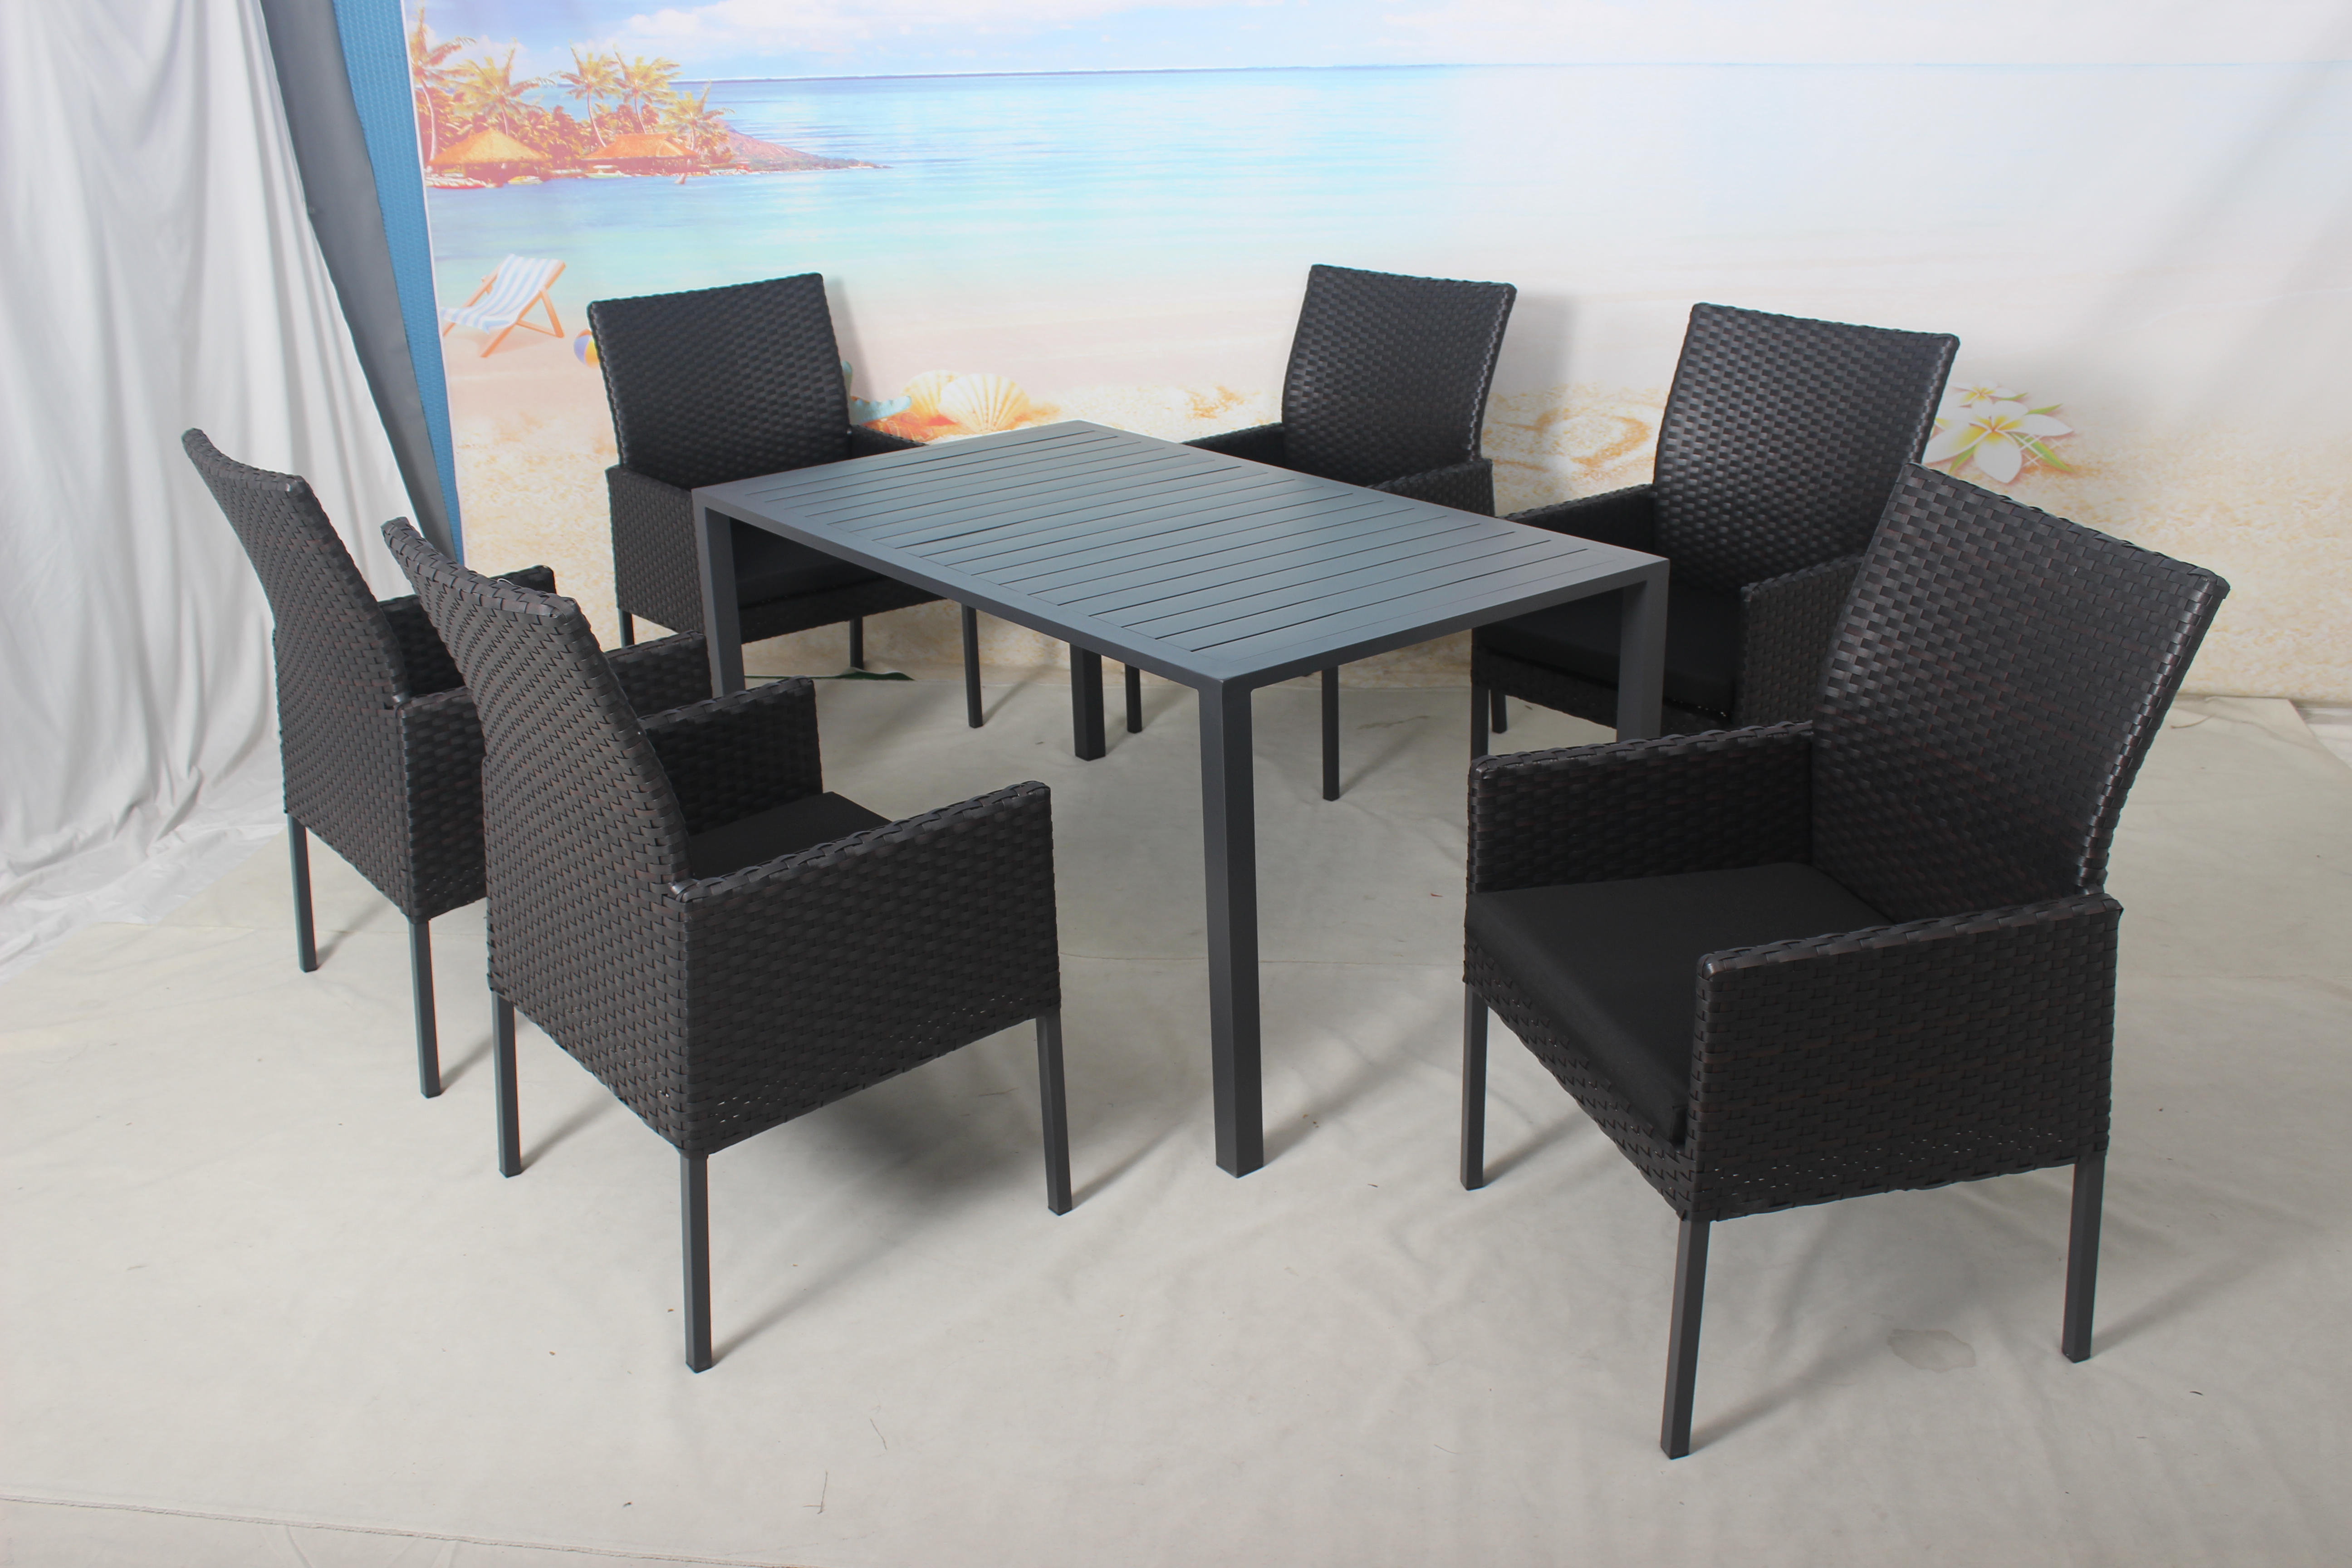 6 seater outdoor restaurant dining table set 